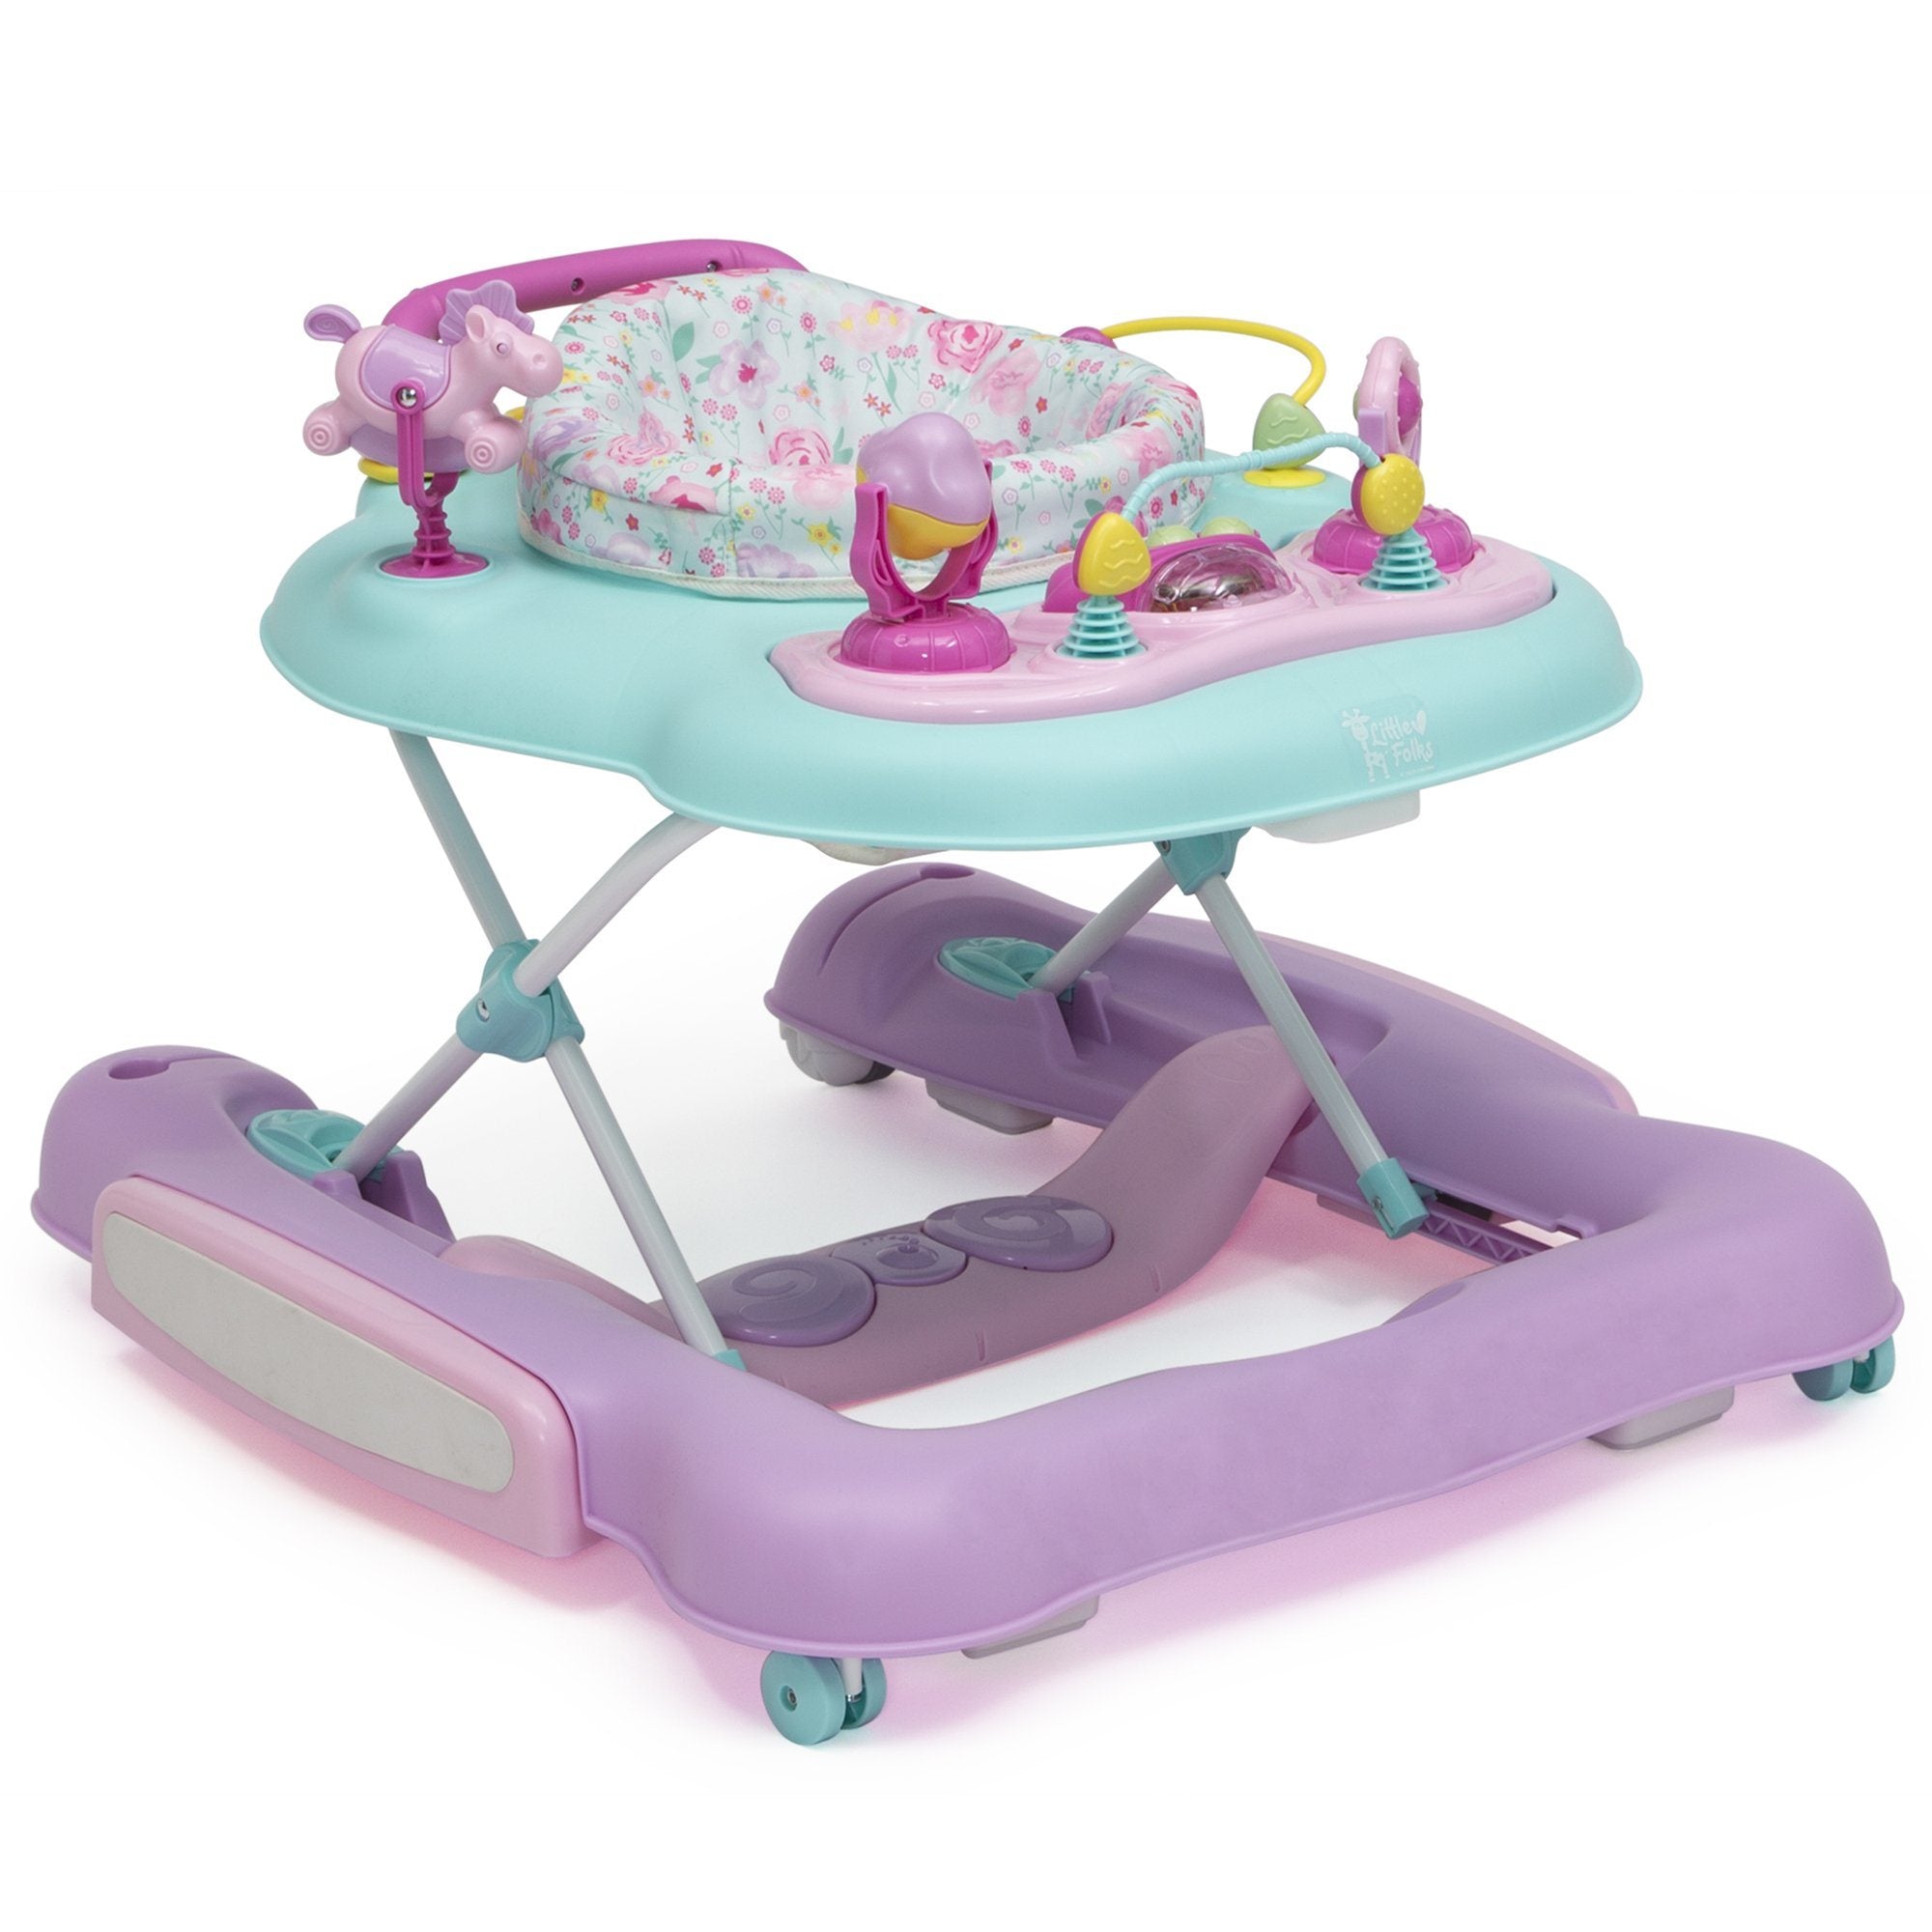 4 in 1 baby walker with music; the same style for men and women